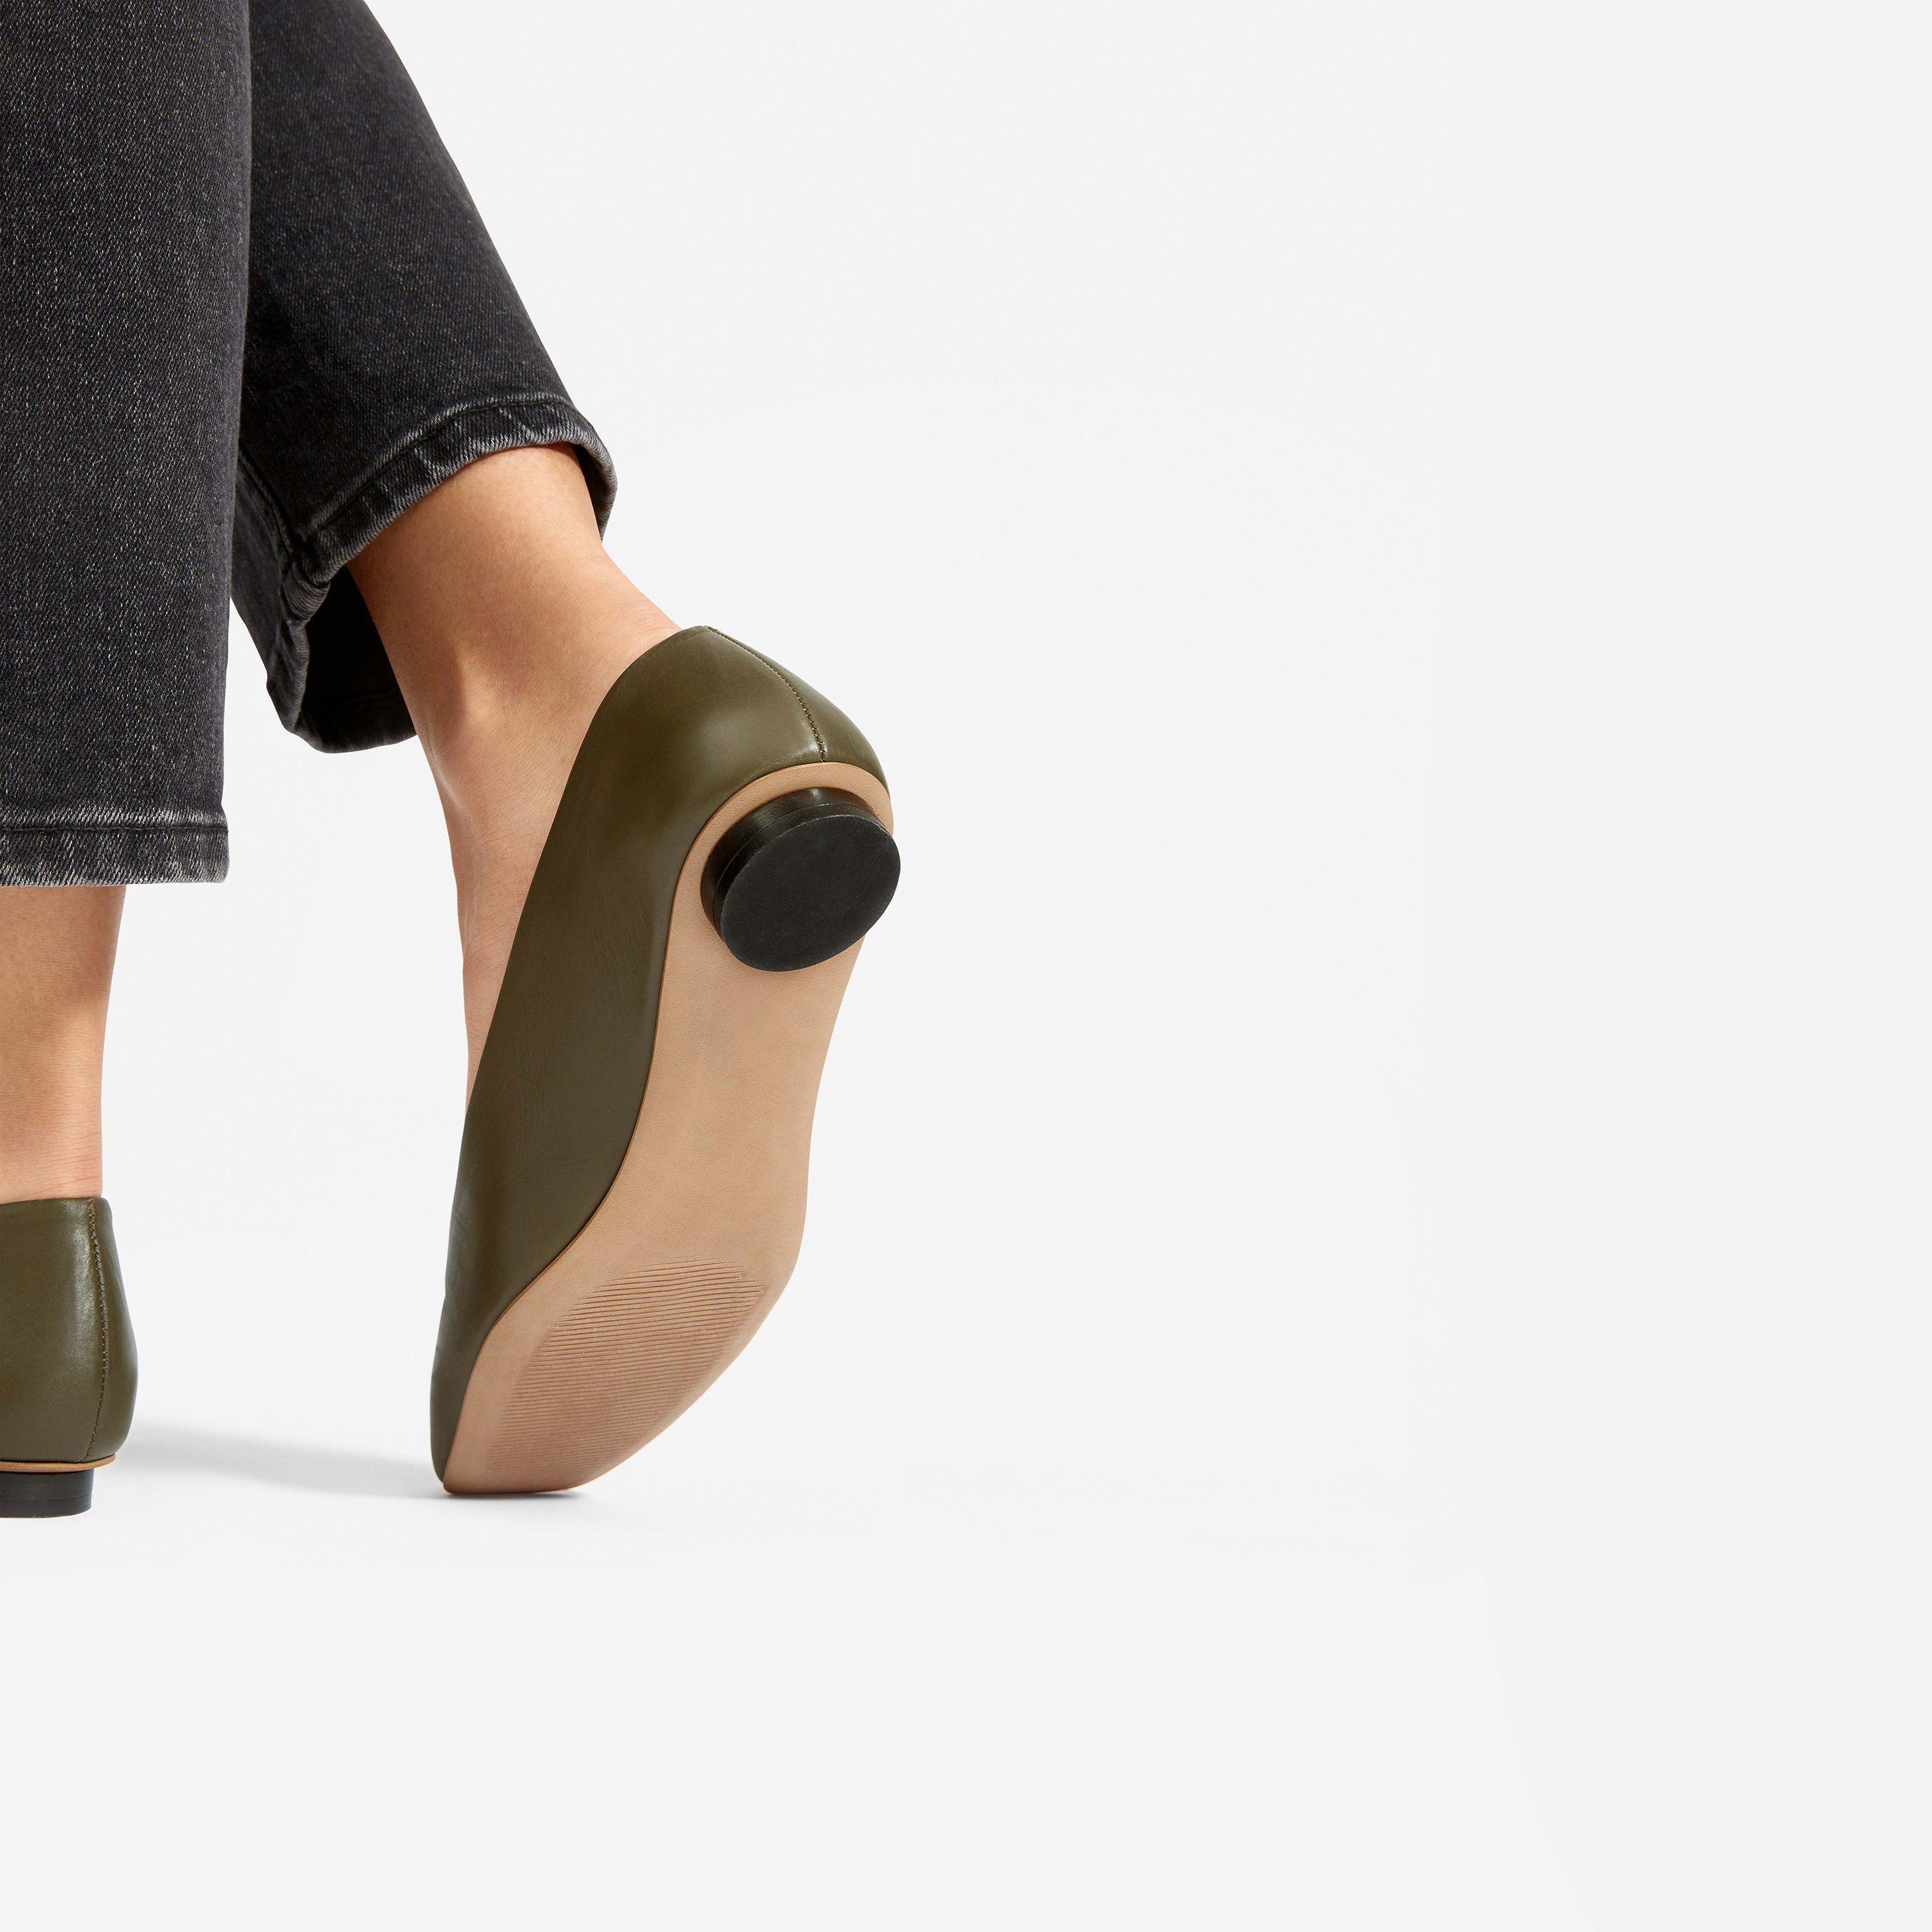 everlane square toe flat review